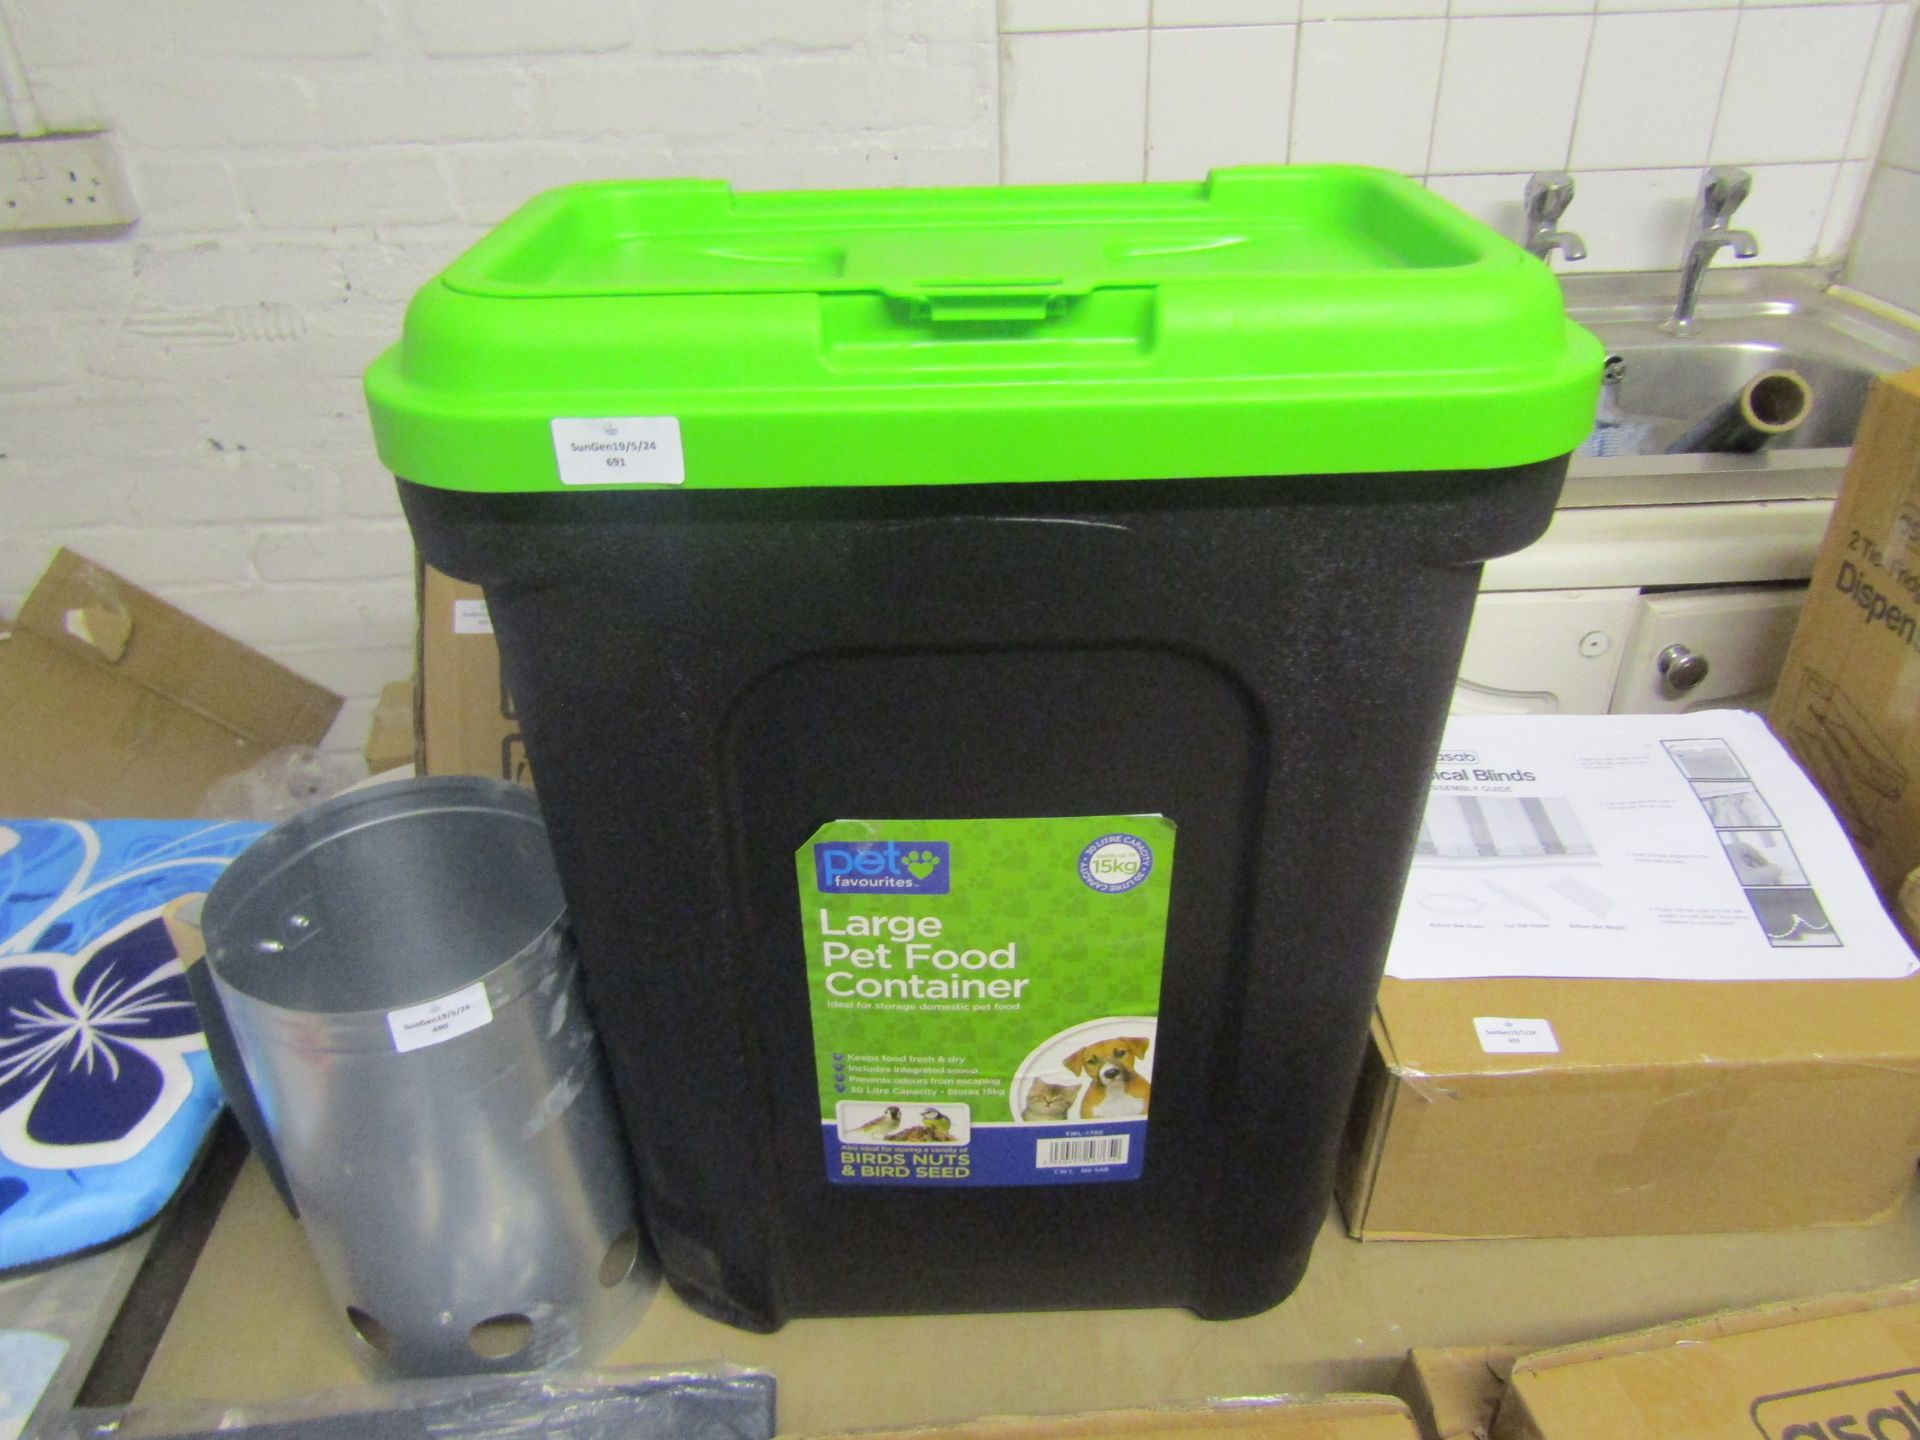 Pet Favourites 30L Large Pet Food Container, Black/Green - Looks To Be In Good Condition.